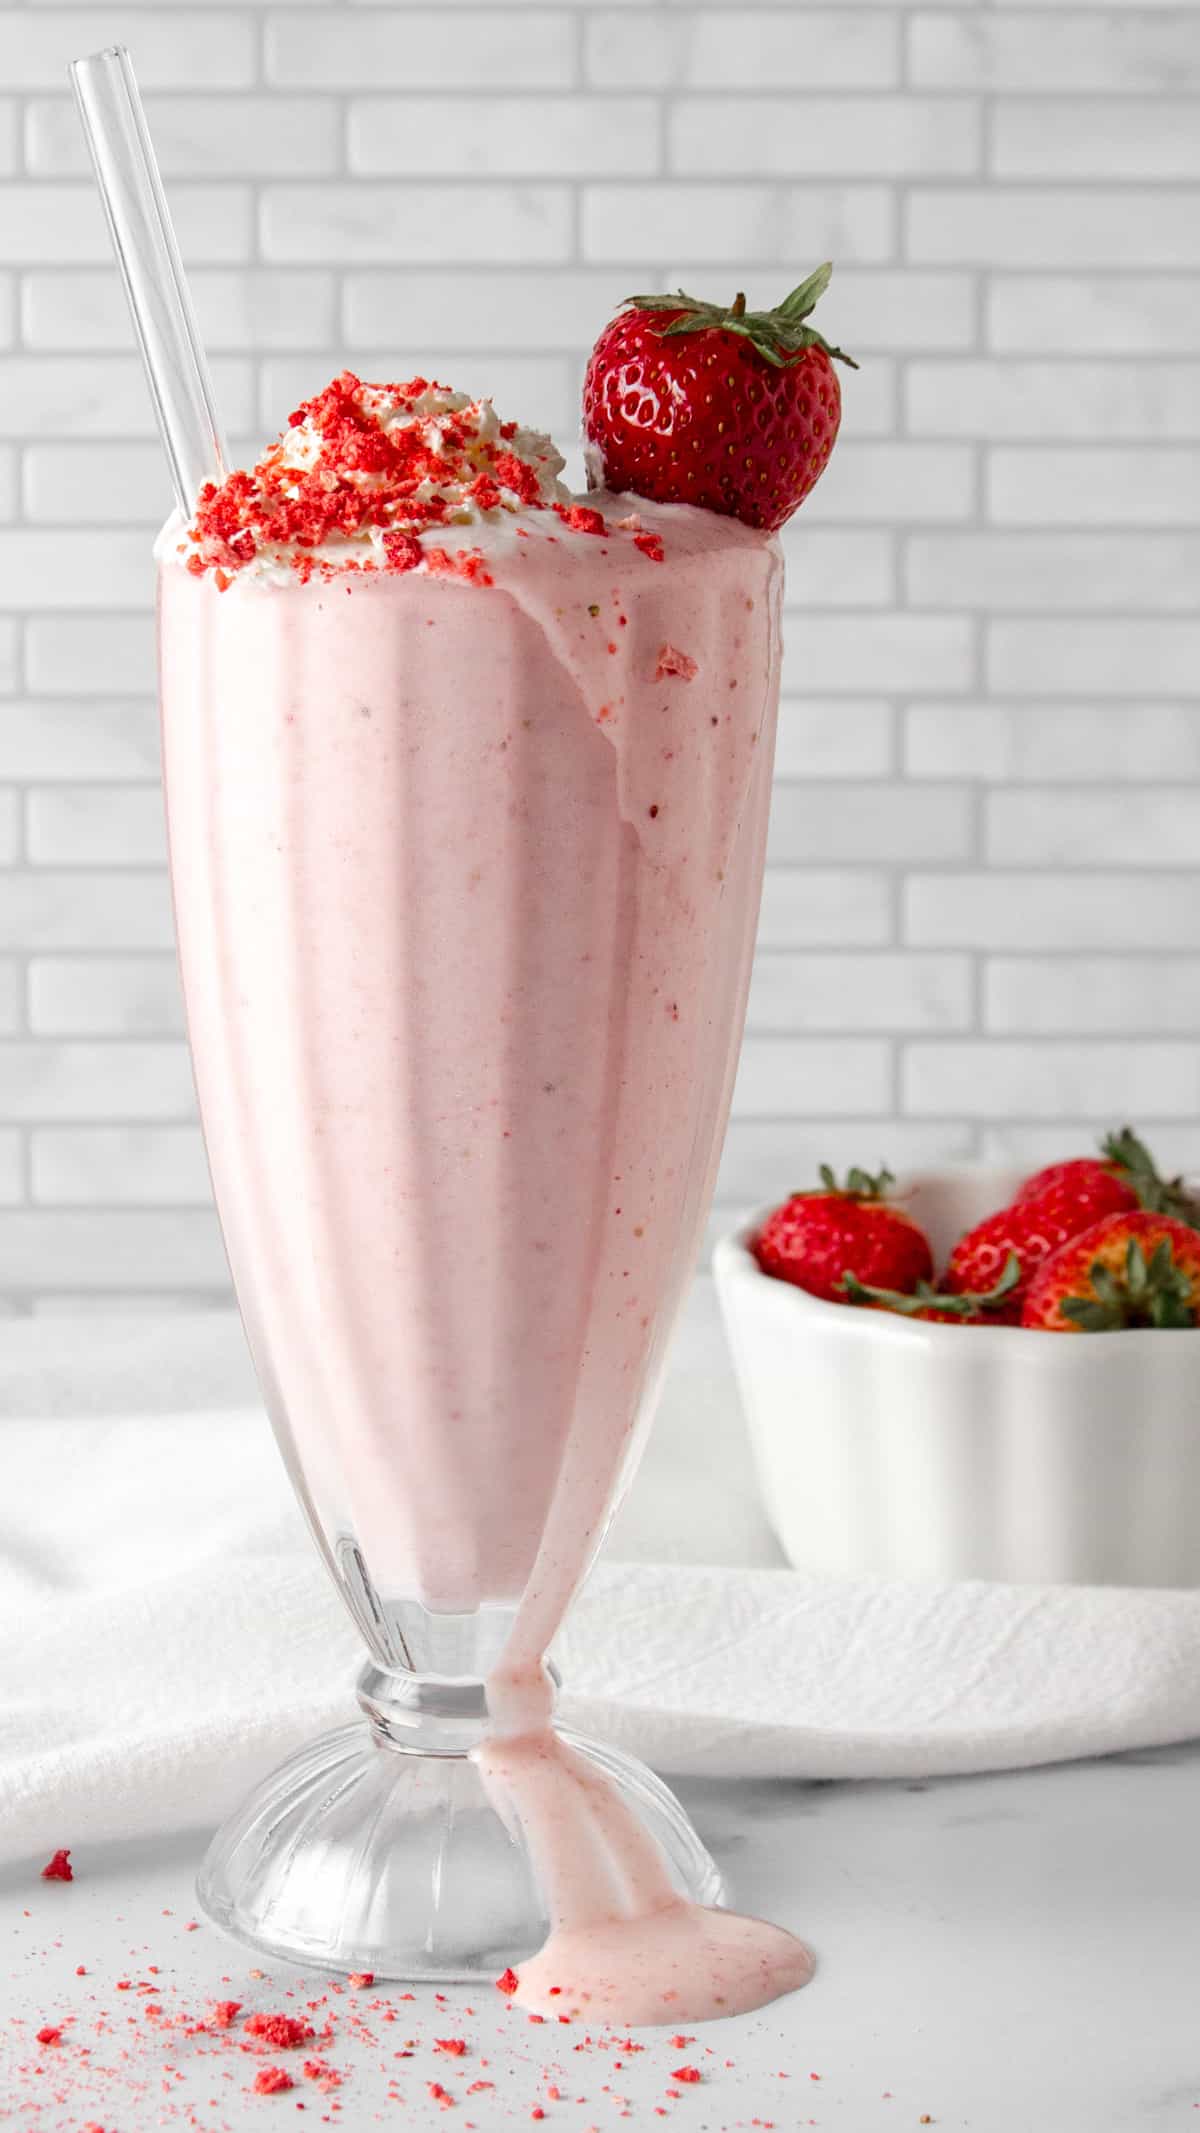 strawberry protein shake with toppings.